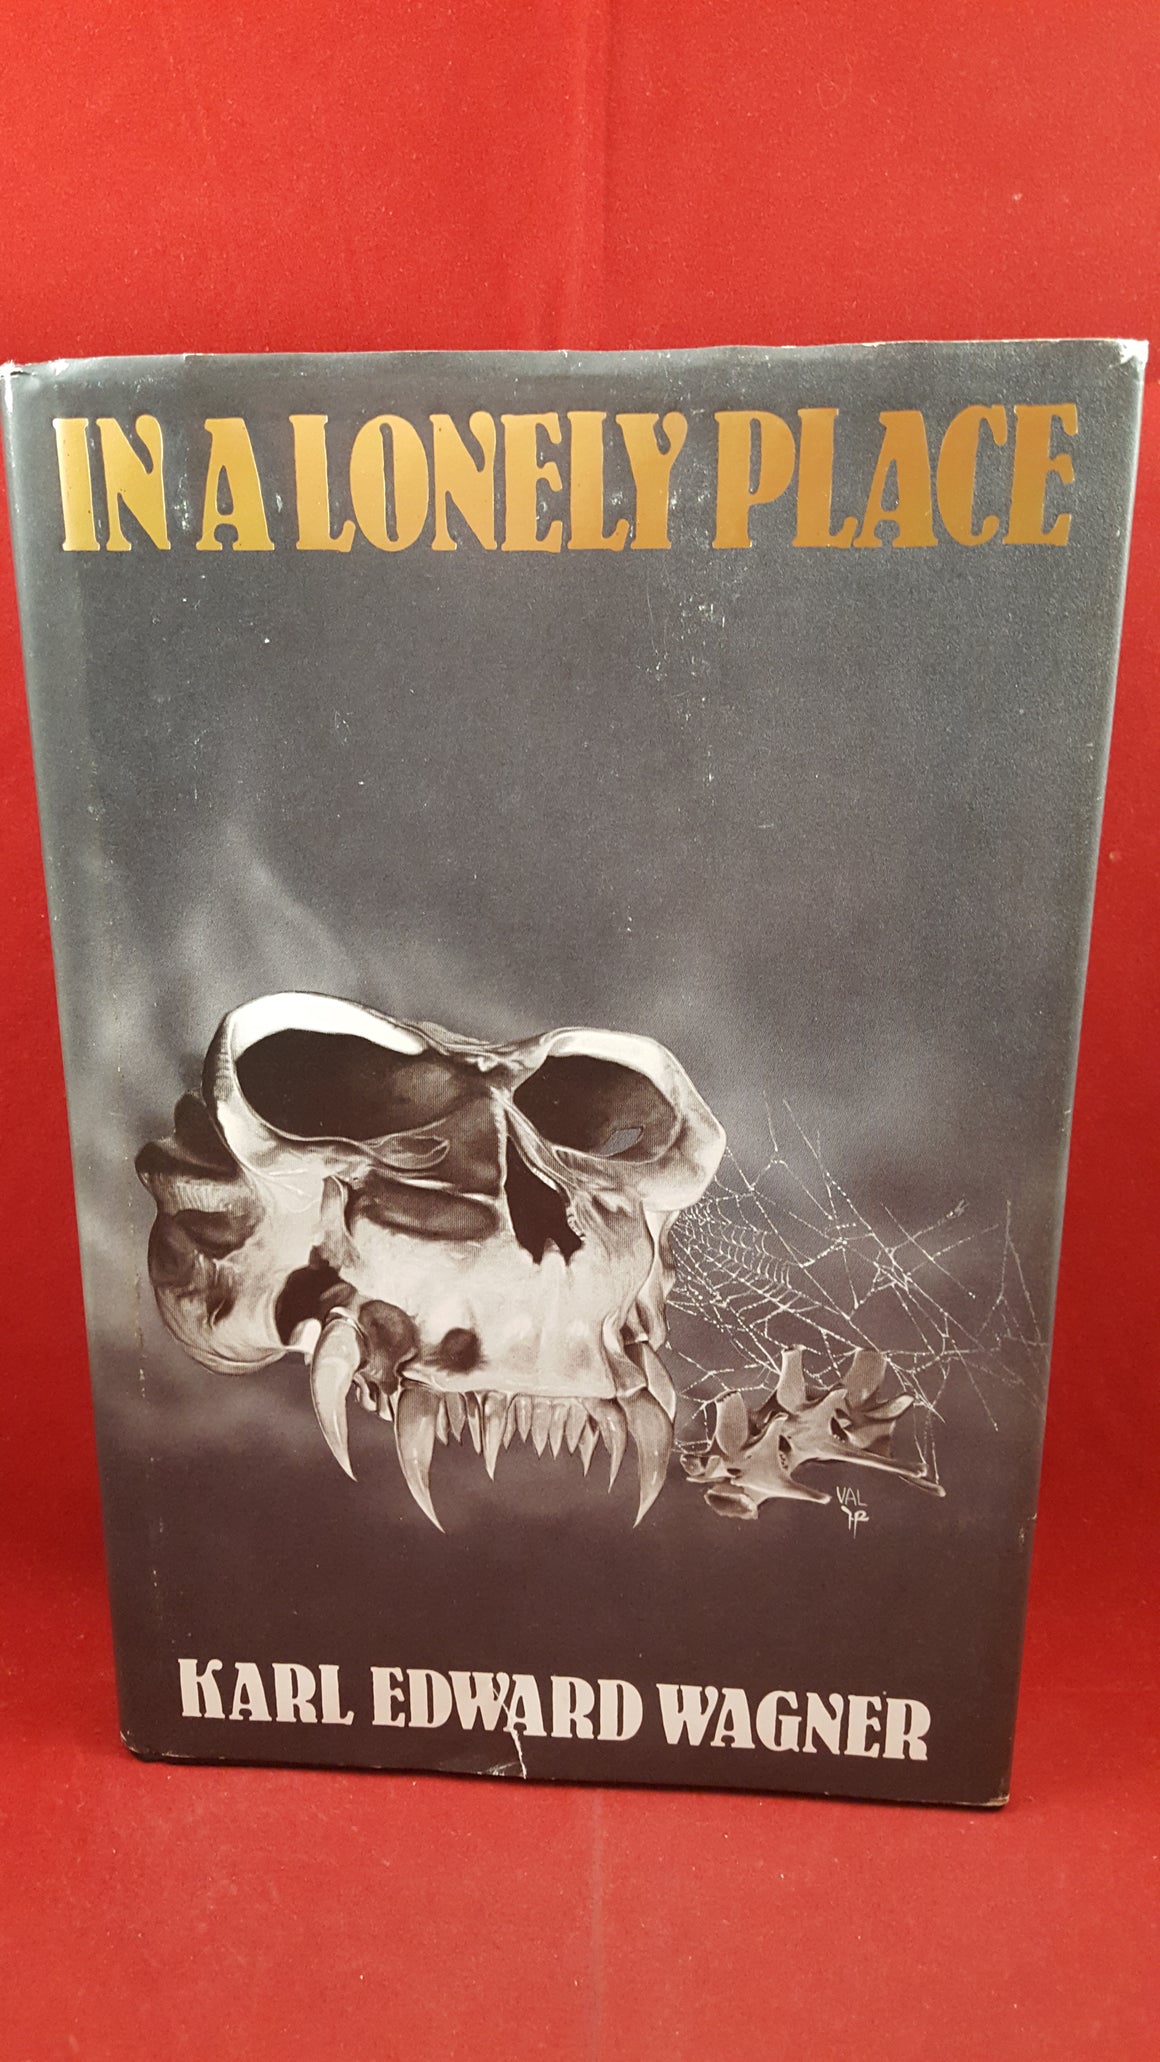 In a Lonely Place by Karl Edward Wagner